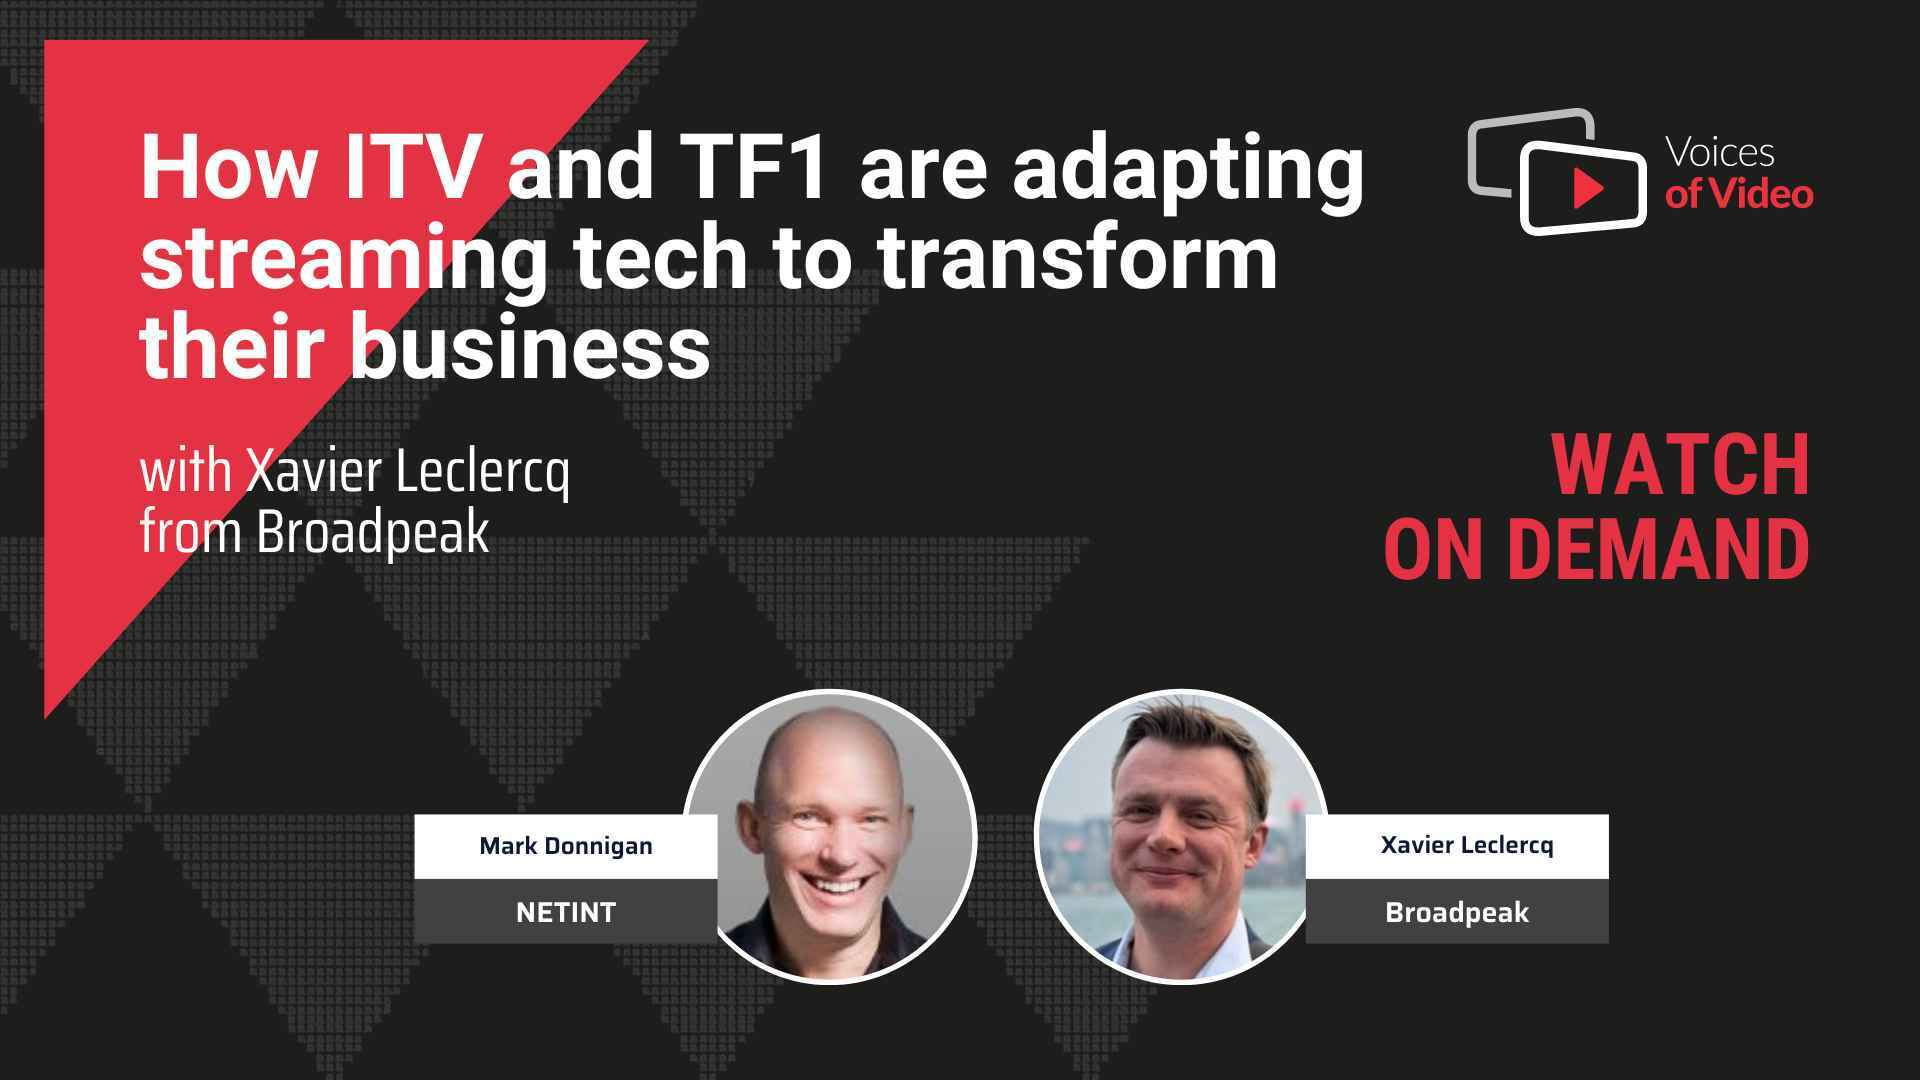 How European broadcasters like TF1 are adapting streaming tech to transform their business with Xavier Leclercq from Broadpeak